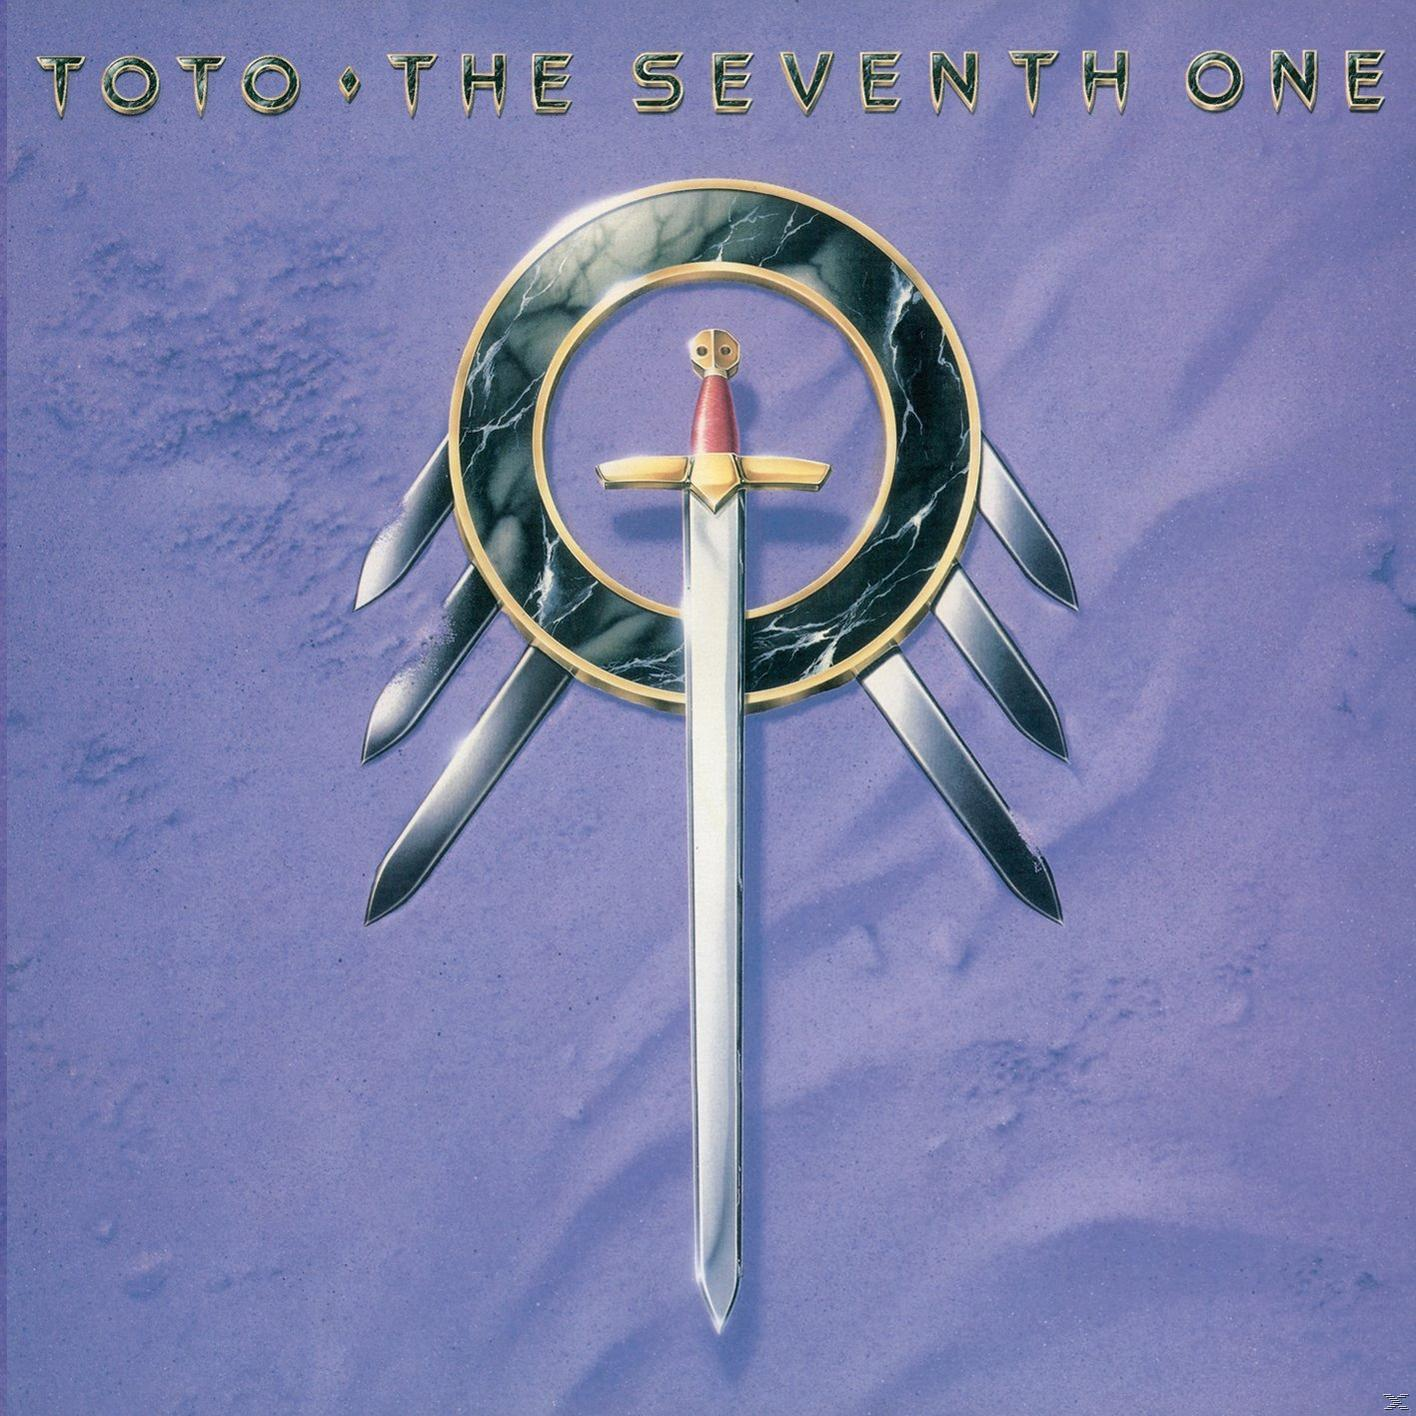 - The (Limited Collectors (CD) Toto One Edition) - Seventh